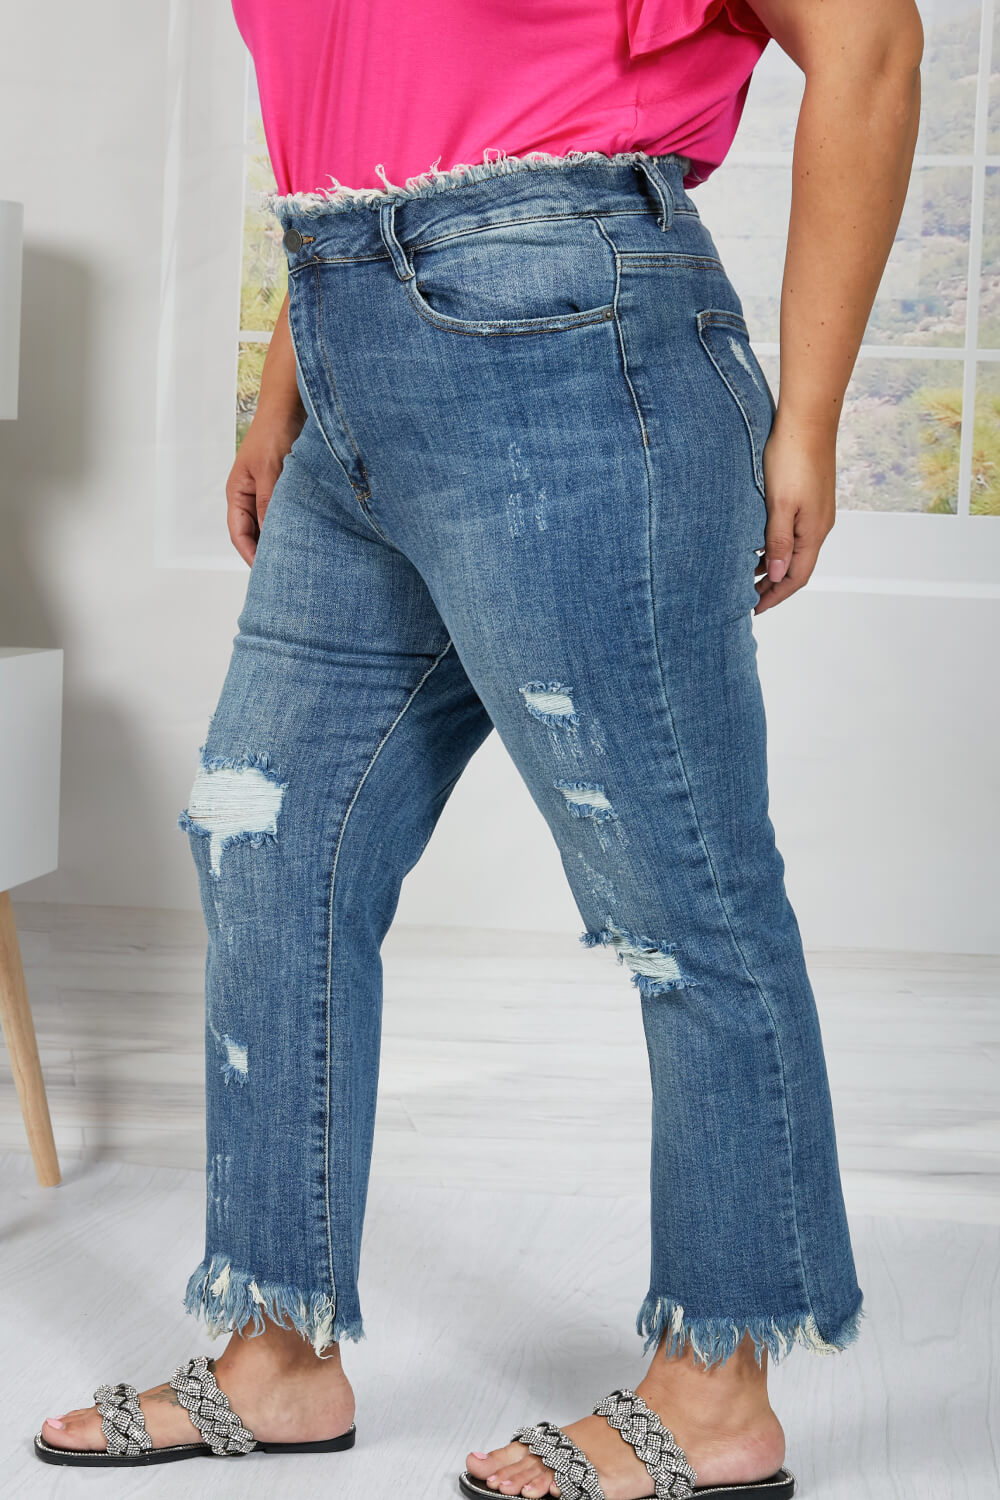 These straight leg jeans really amplify the "undone" look that you're trying to achieve. Not only do these jeans have distressing details throughout the body of the jeans, and at the hem, but also at the waist! To emphasize that unique feature, wear these jeans with a crop top. These are a medium wash. Sizes 5-11.